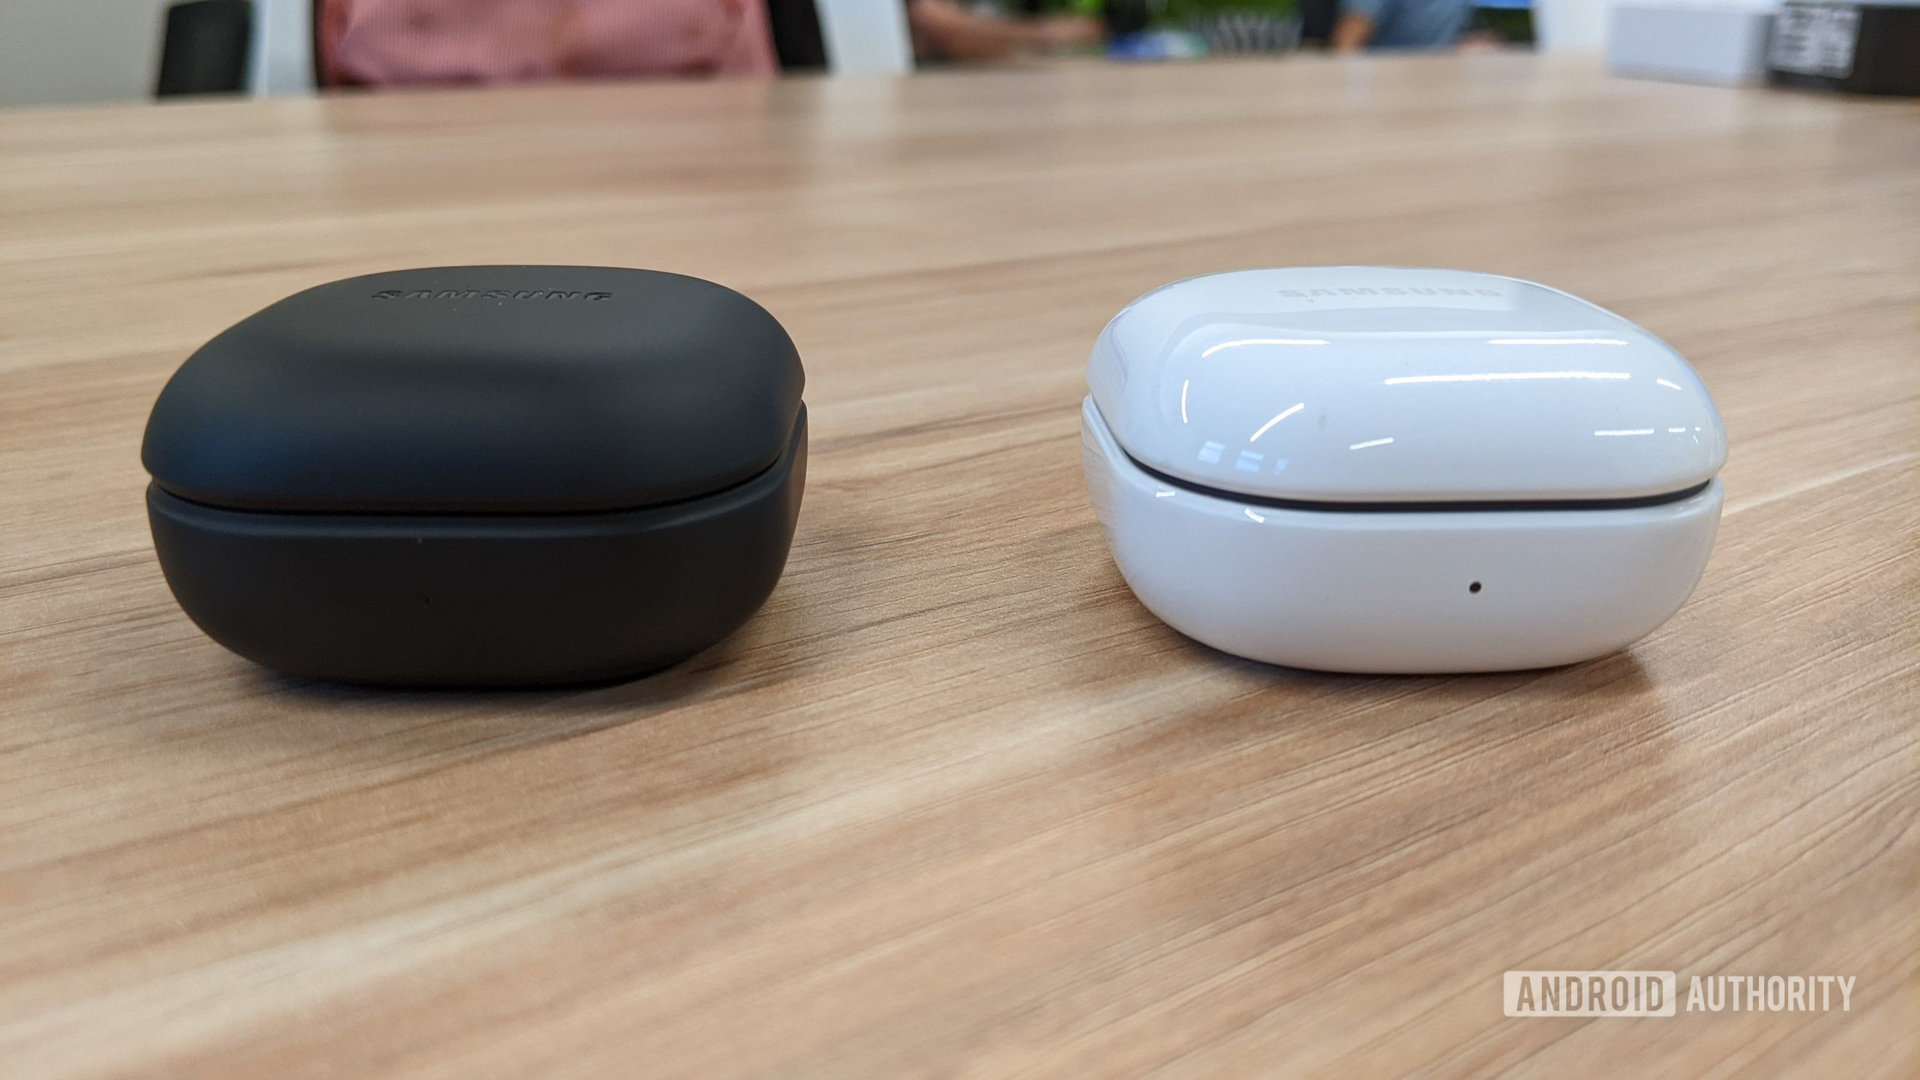 The Samsung Galaxy Buds 2 Pro case in graphite next to the Buds 2 case in white on a wooden table seen from the front.